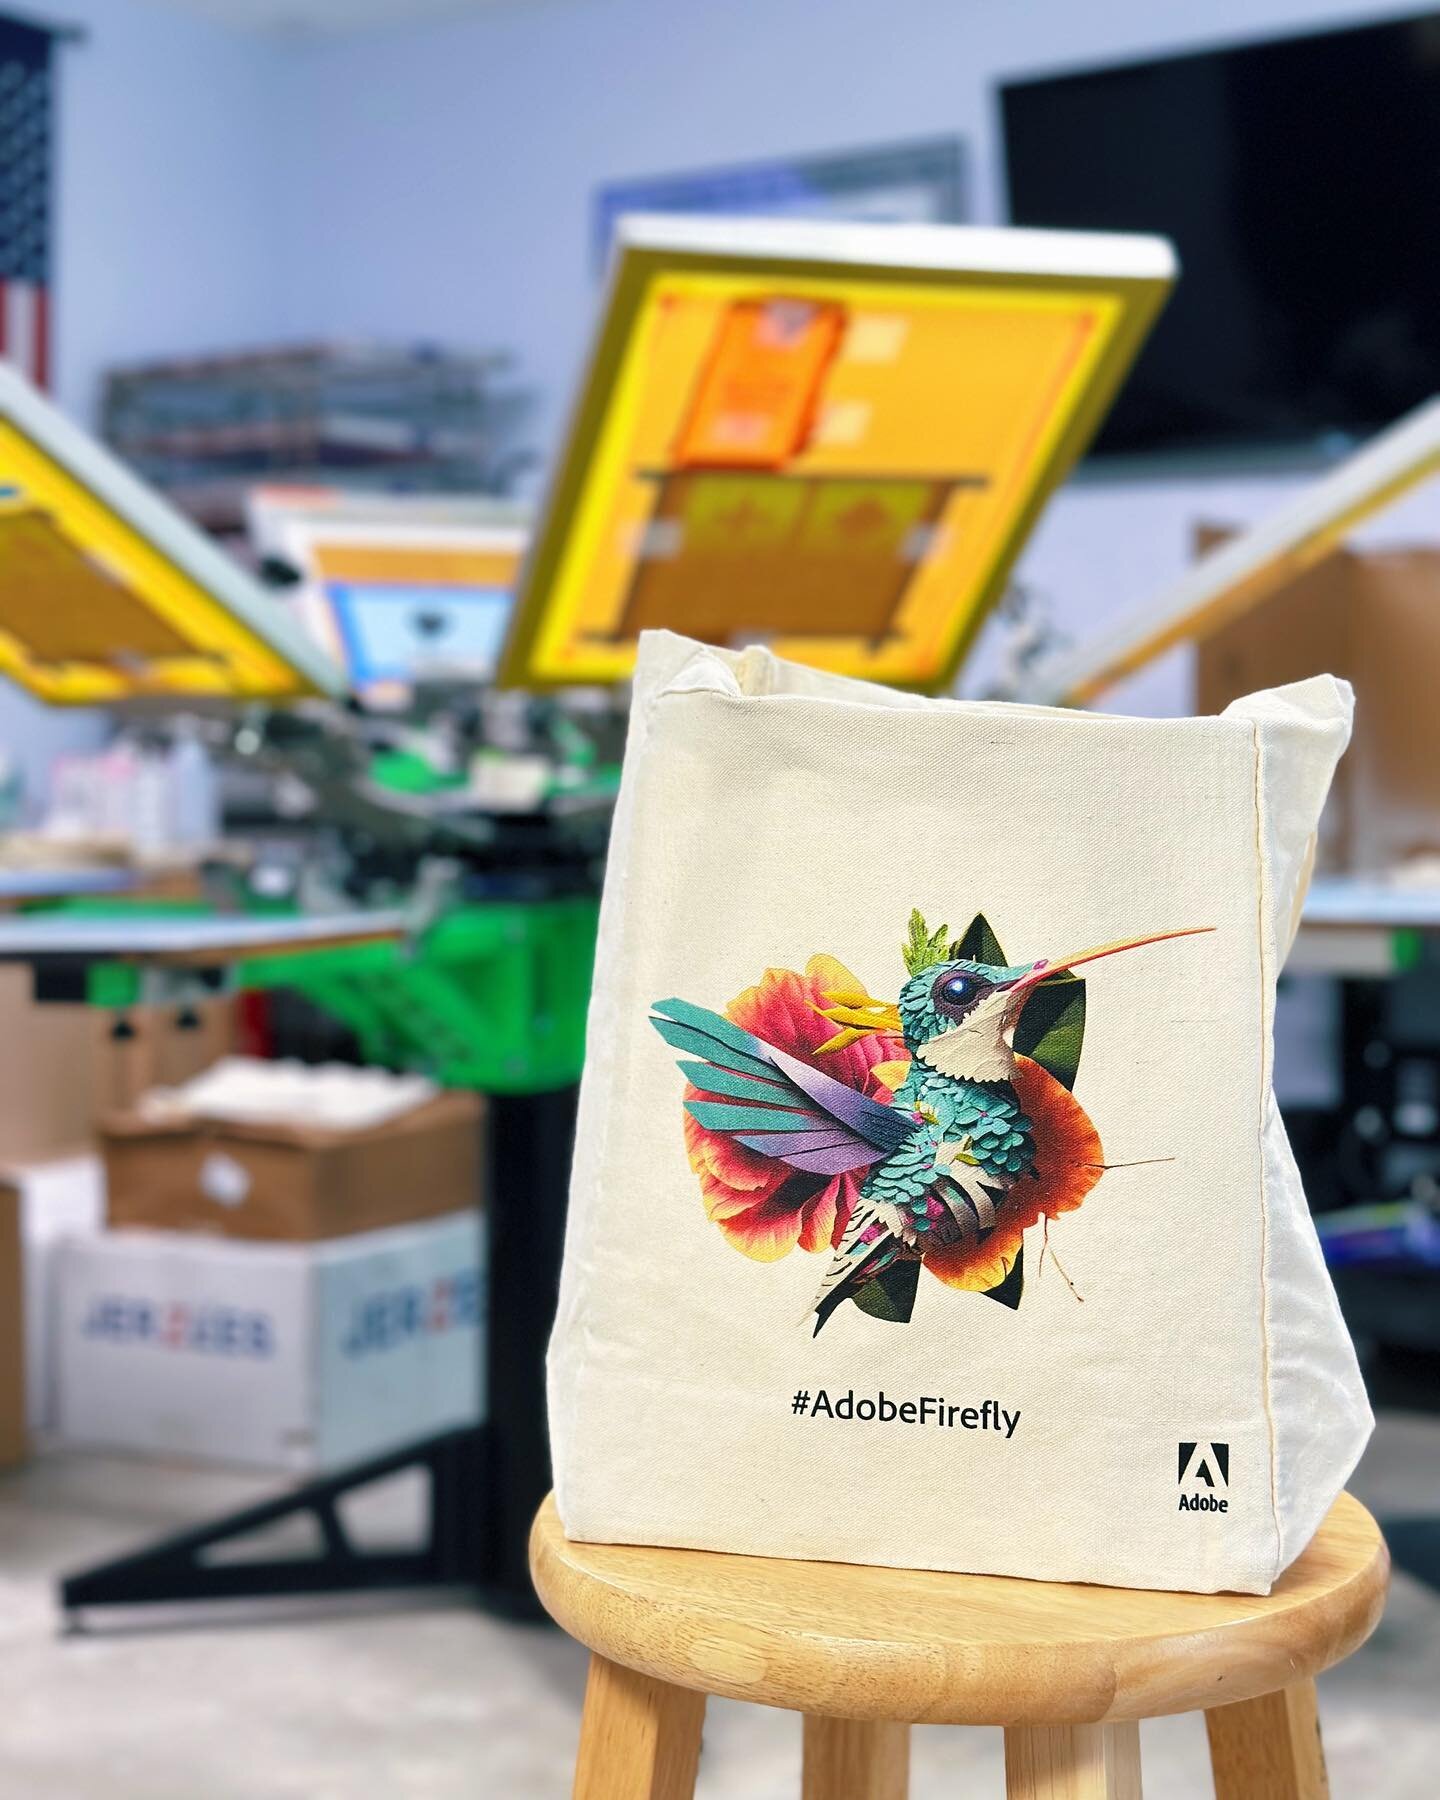 A moment for the bag 🤯 we&rsquo;ve been busy this week with all things tote bags! We&rsquo;ve loved printing these bags - they are perfect for summer! 😎

#mmpcustoms #dtgprinting #customdtg #customprinting #customdesign #screenprinting #screenprint